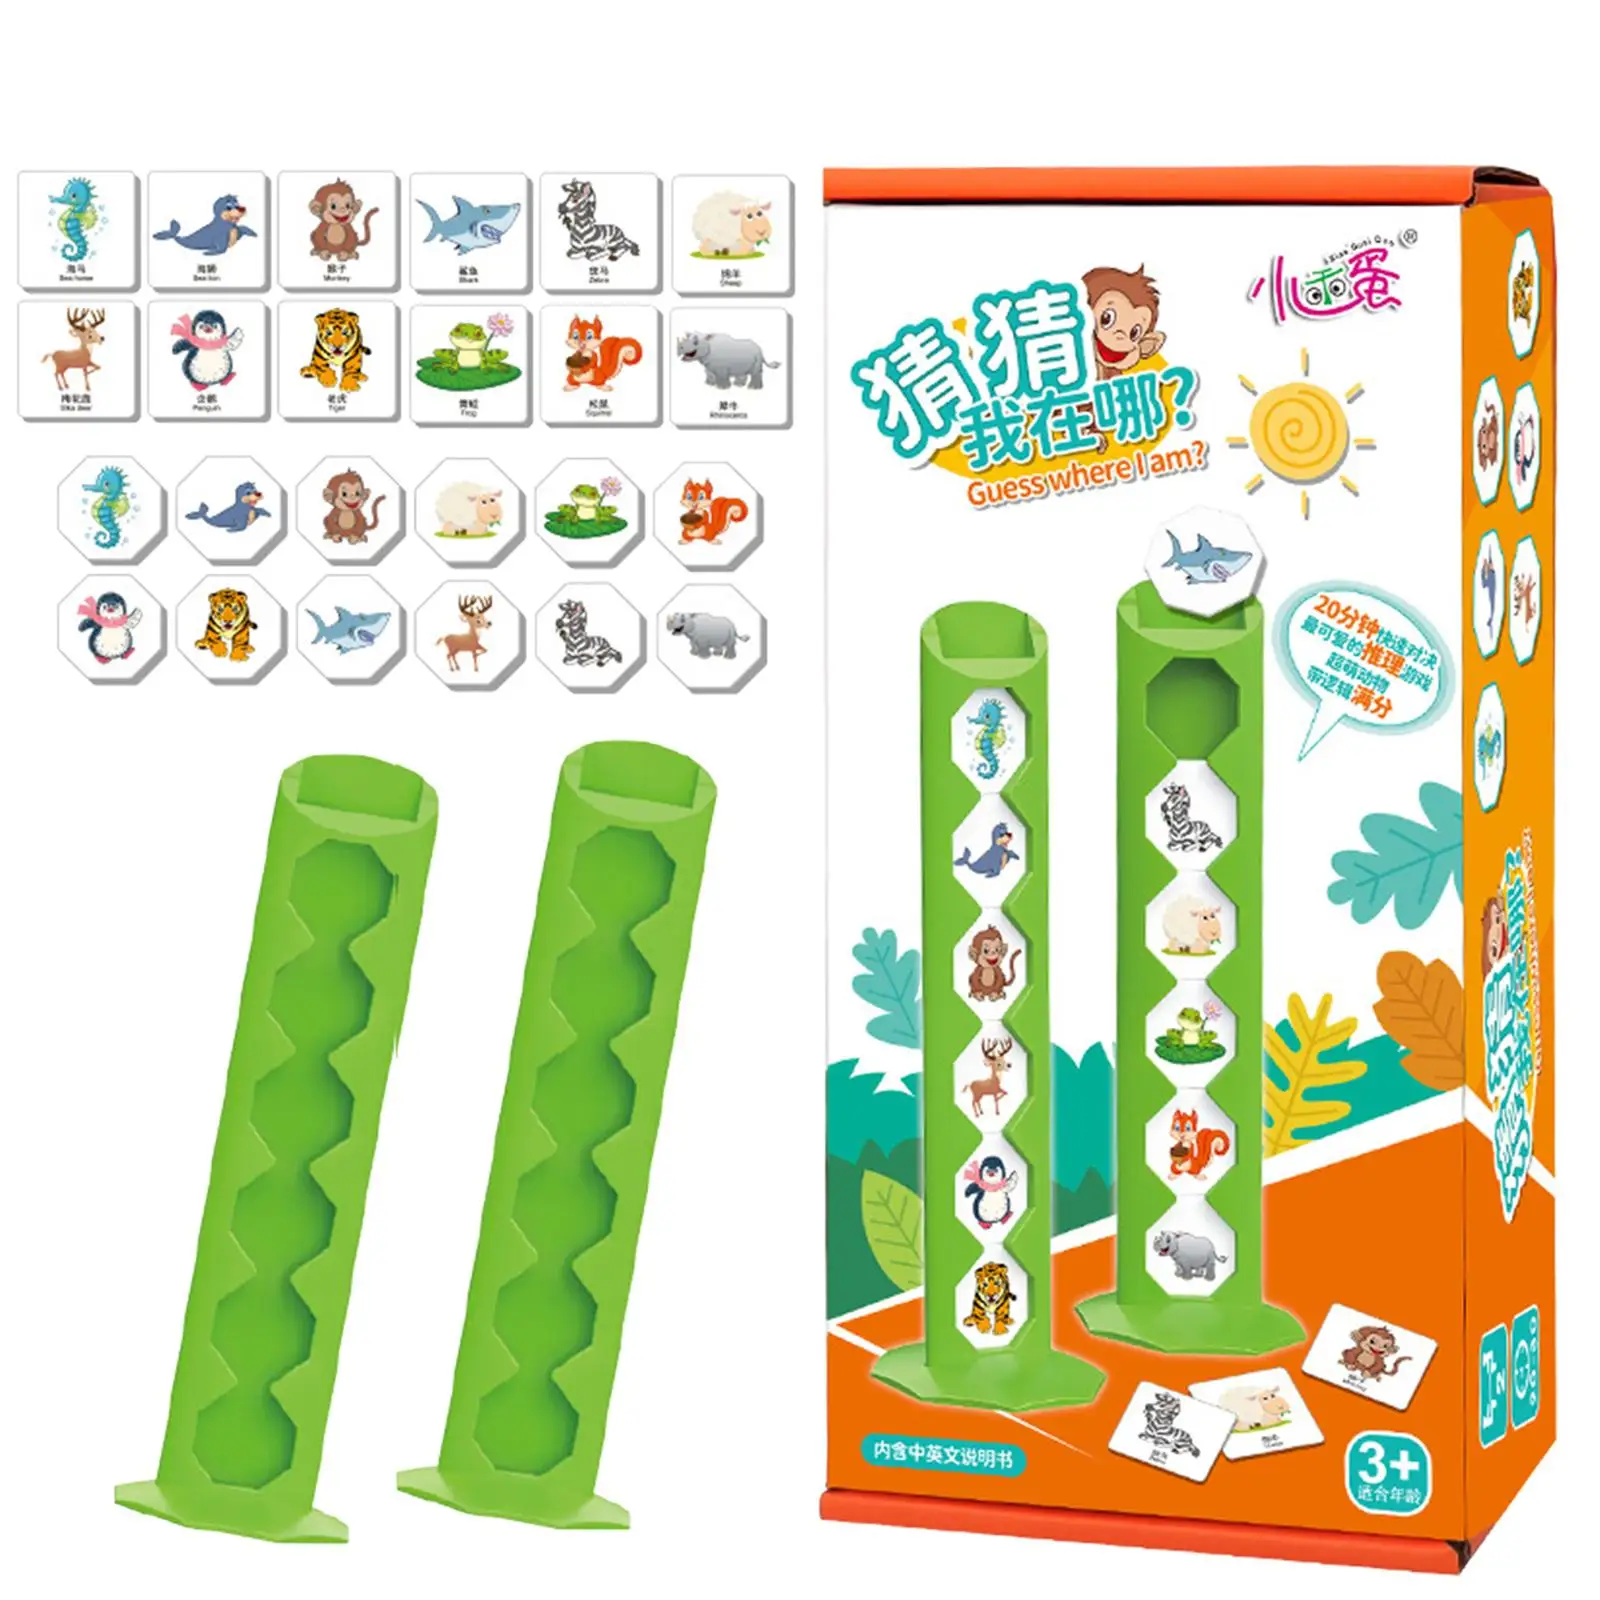 Guessing Game for Kid Fun Logical Reasoning Abilities Character Card for Gifts Party Prop Family Game Travel Games